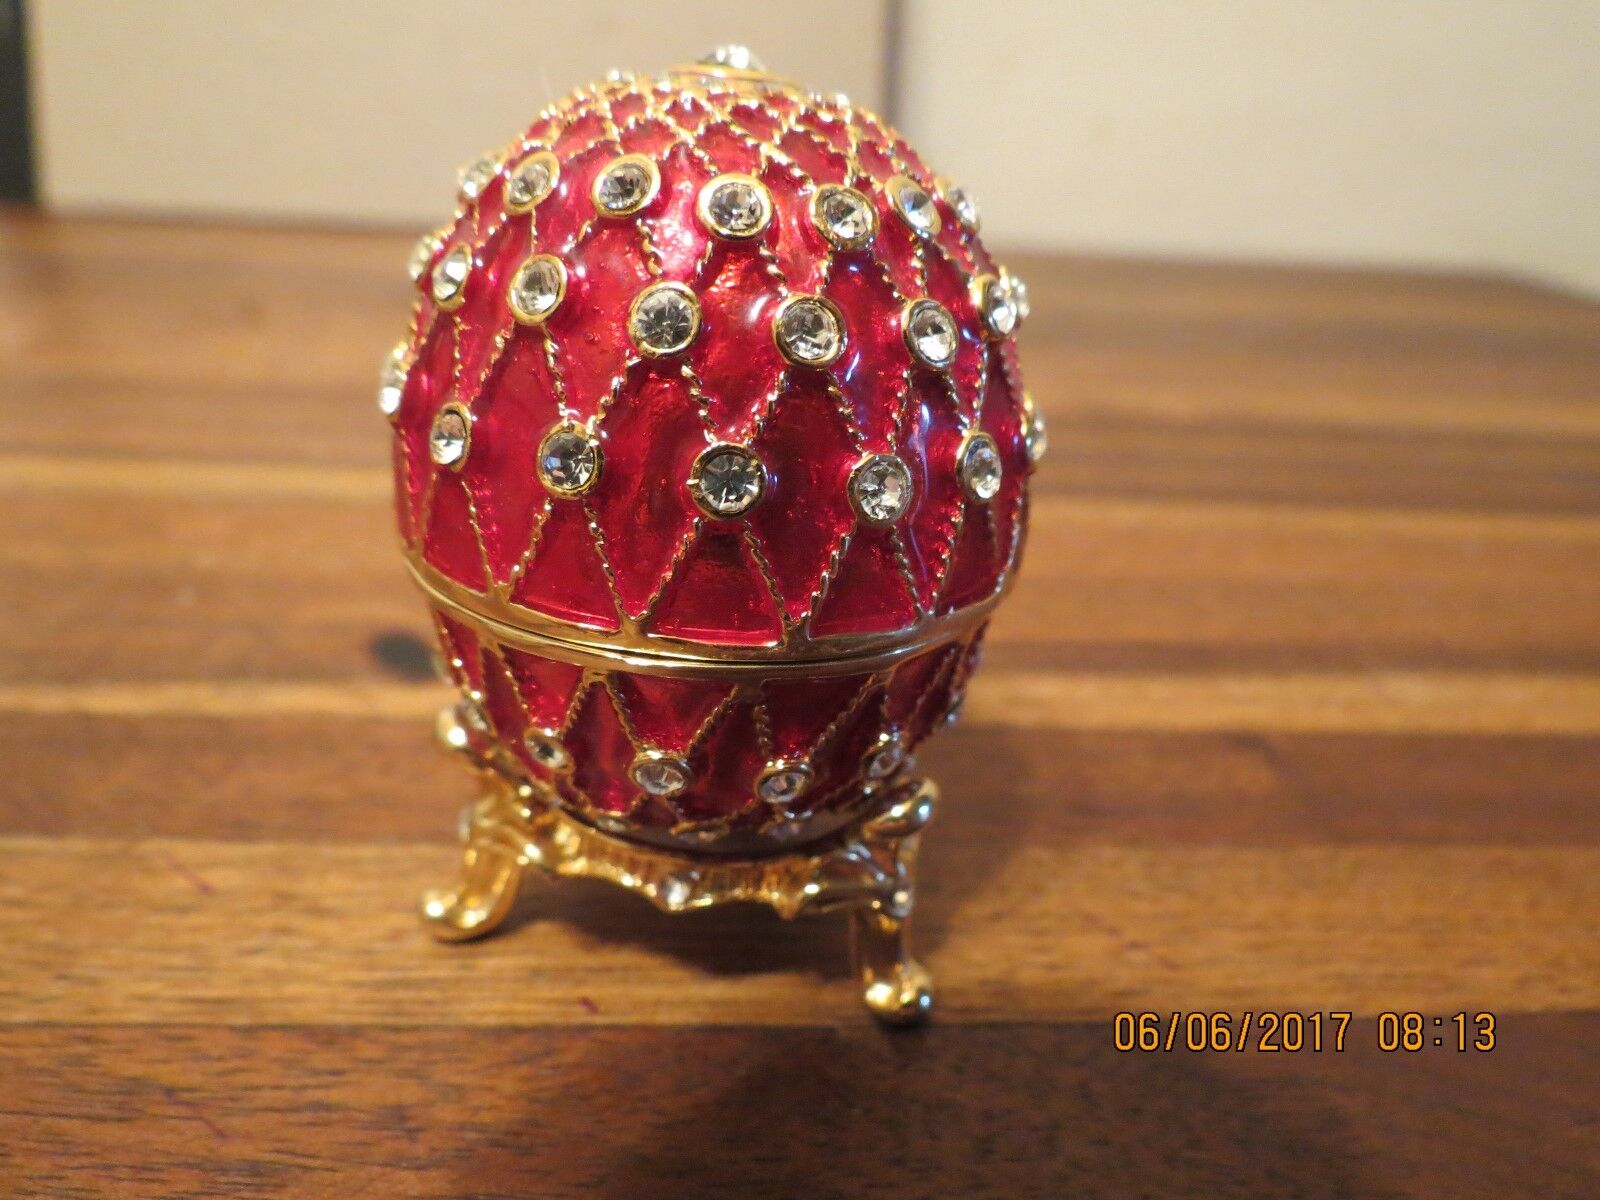 SMALL FABERGE EGG